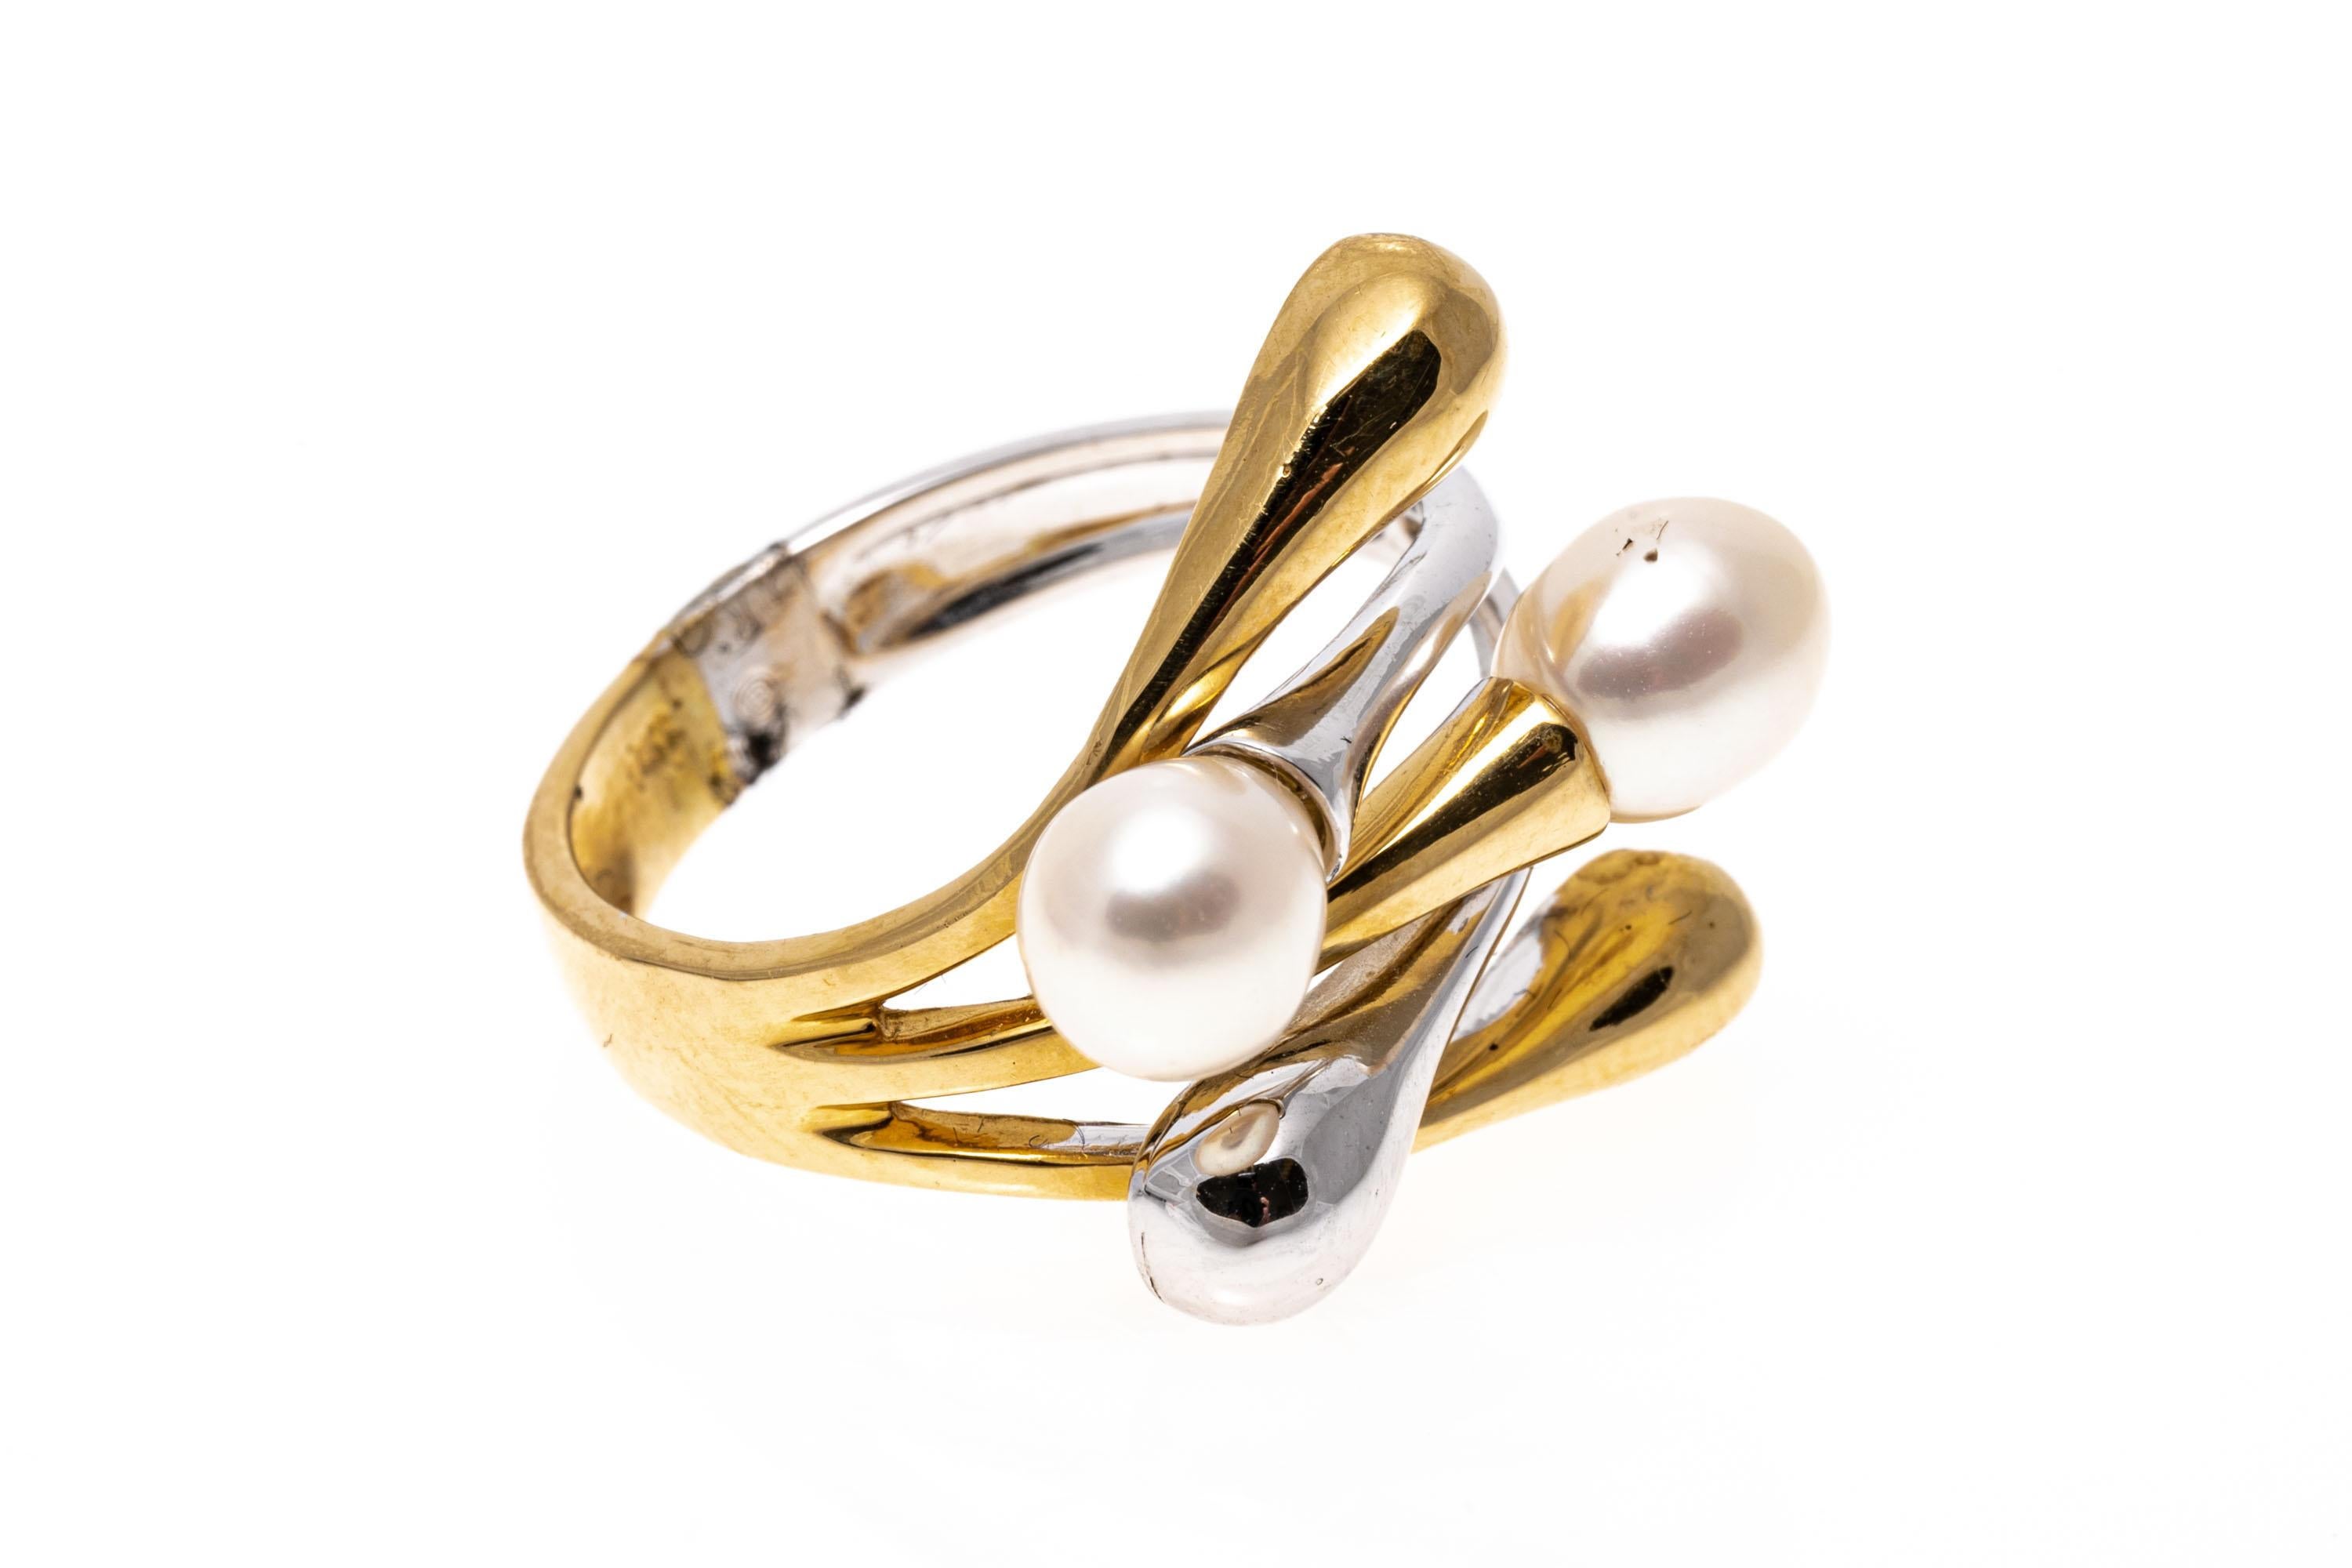 14K two-tone ring. This unique ring features a contemporary intertwined high polished yellow and white branching design spanning out from the center, decorated with alternating cultured freshwater pearls on the ends.
Marks: 14K
Dimensions: 3/4